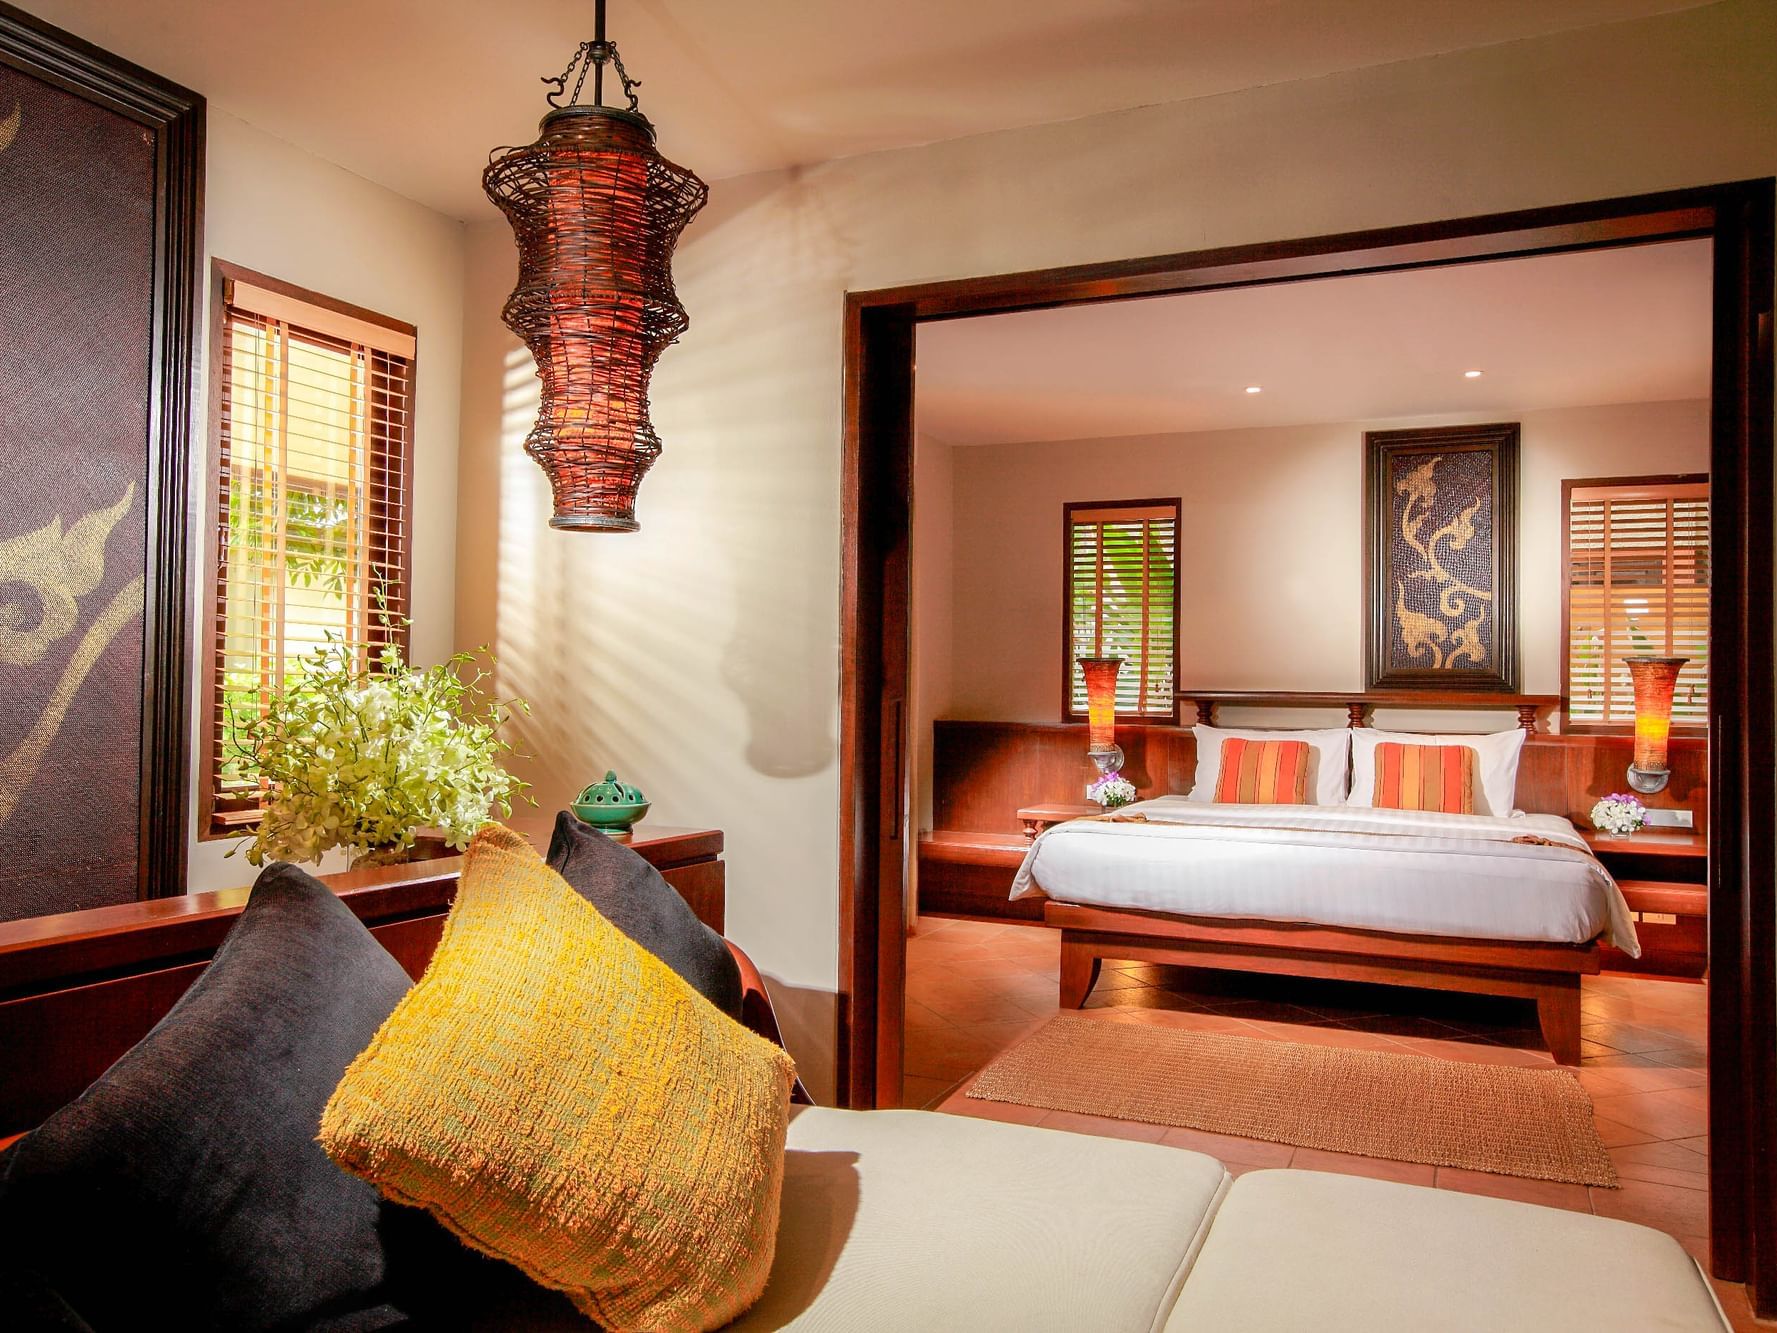 One-bedroom suite villa with King bed in bedroom and sofa bed in the living room